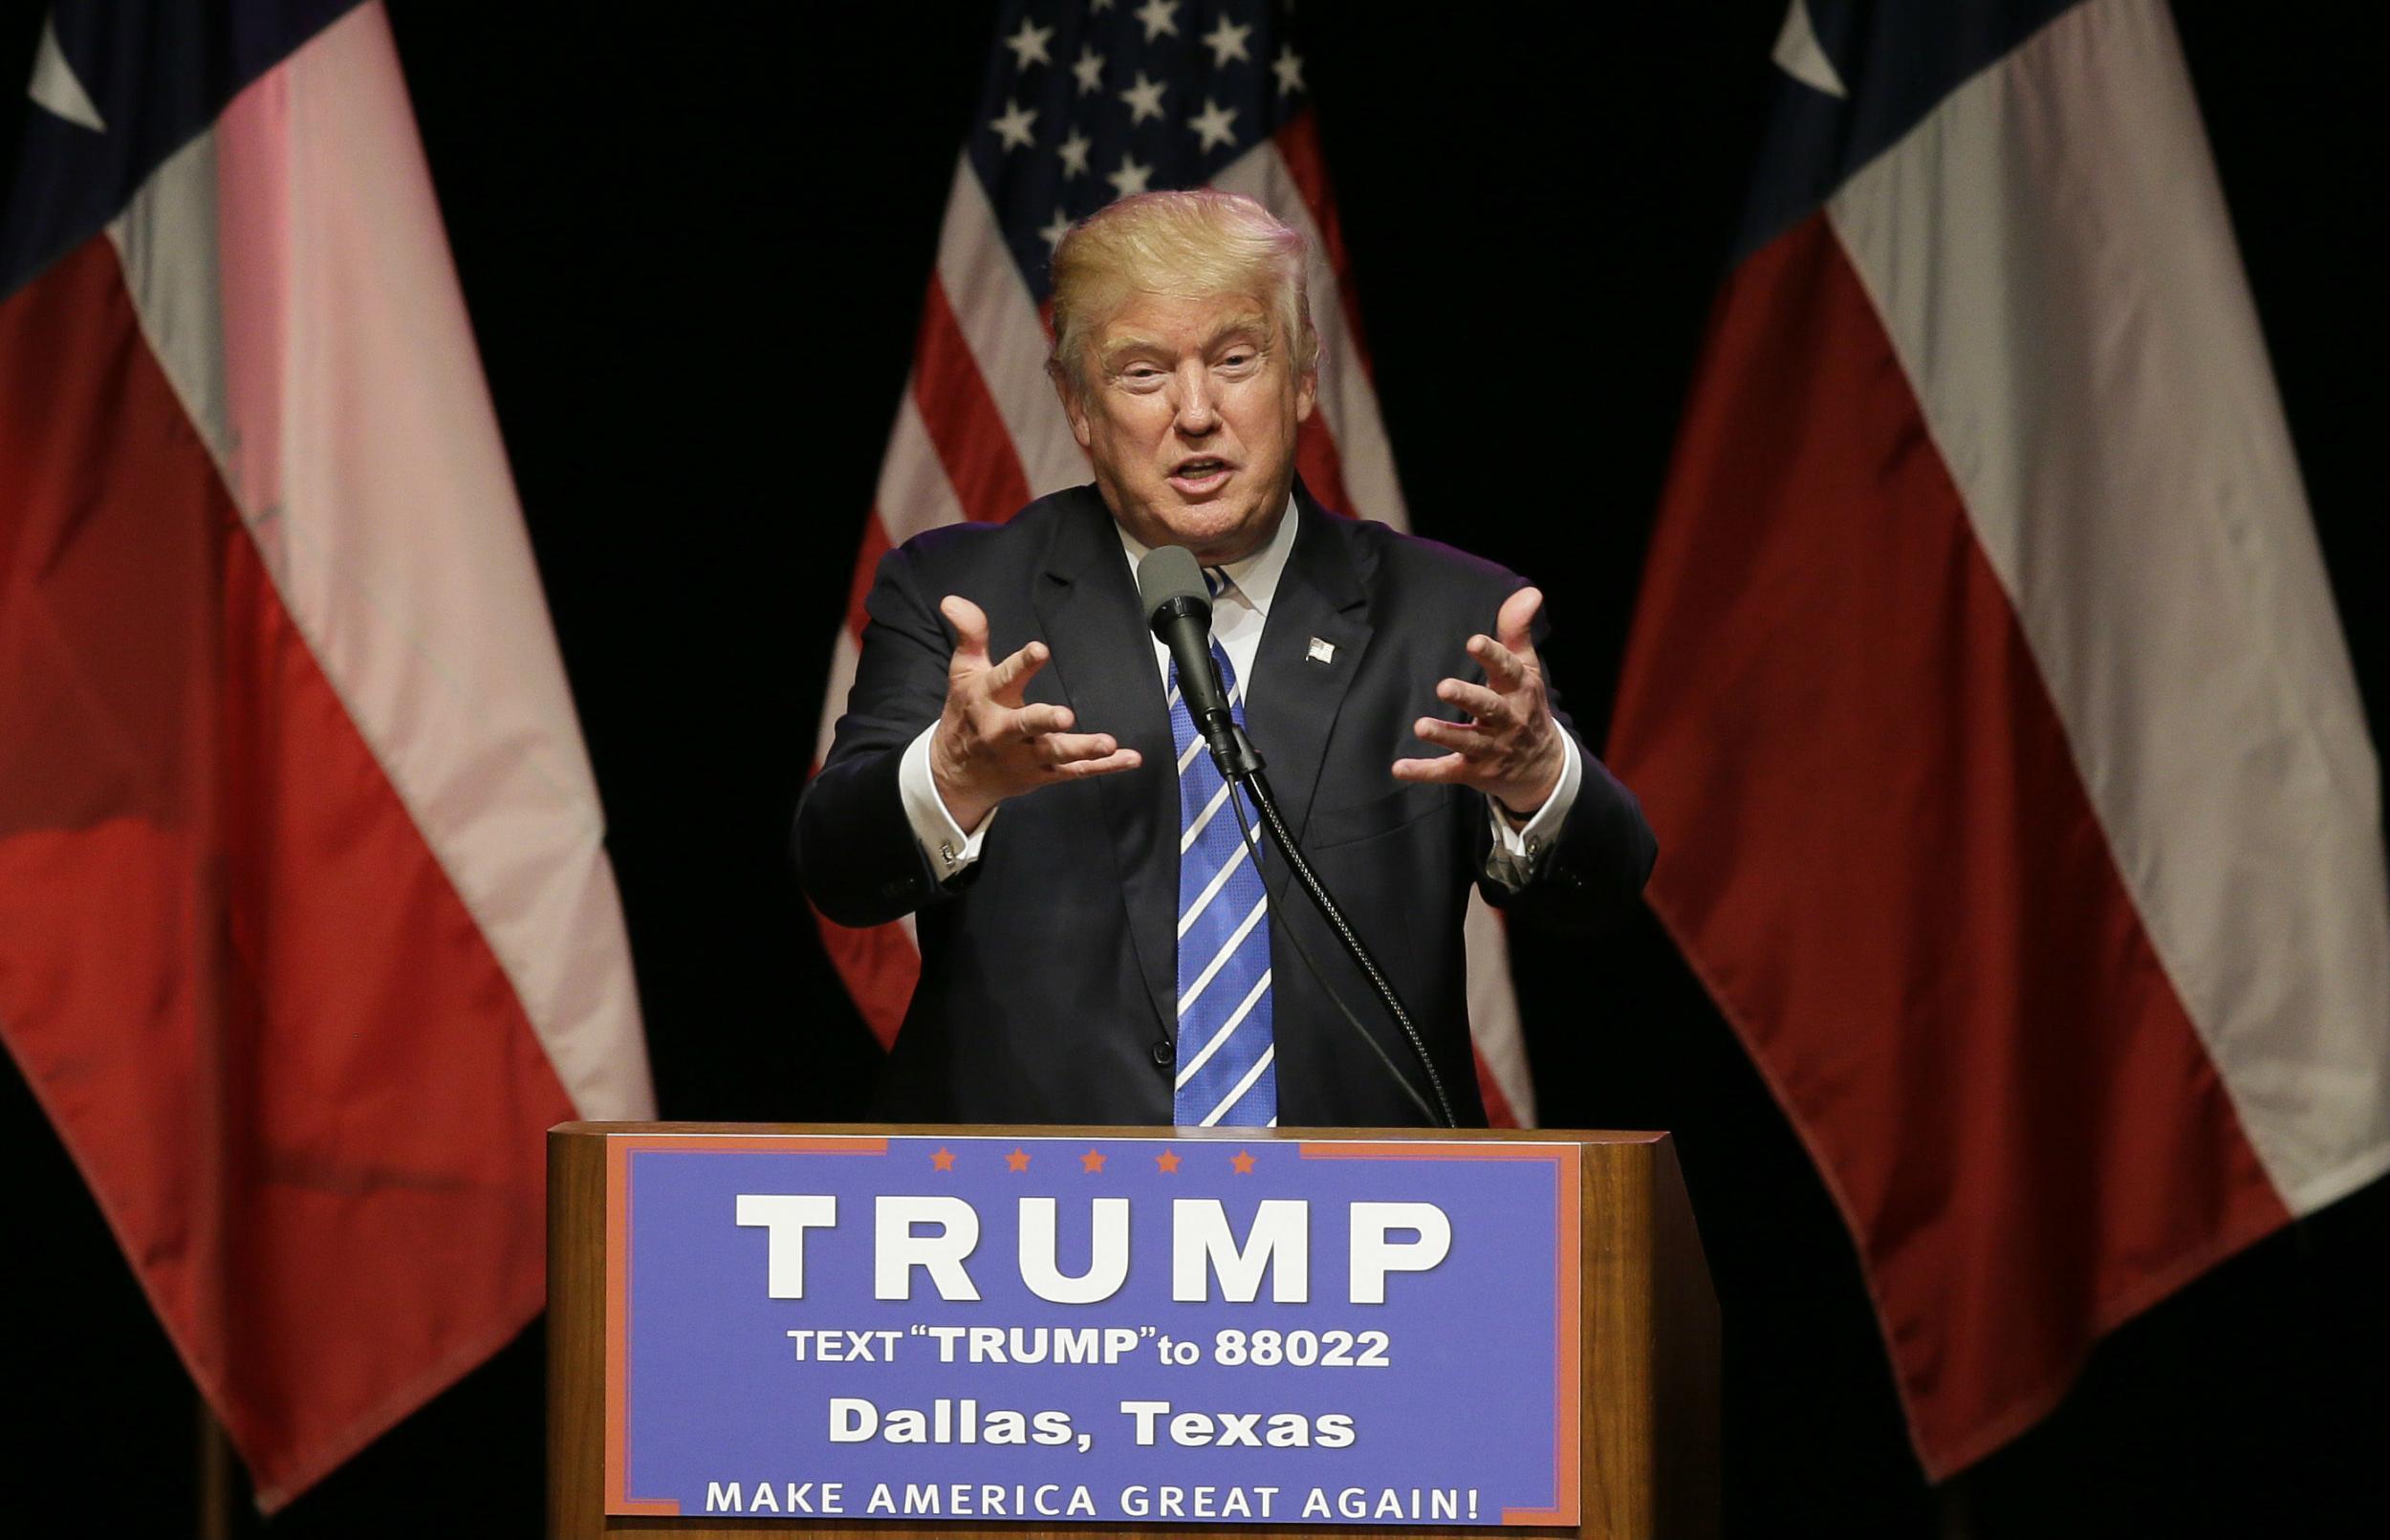 In Texas, Trump invites Sanders supporters to come on board